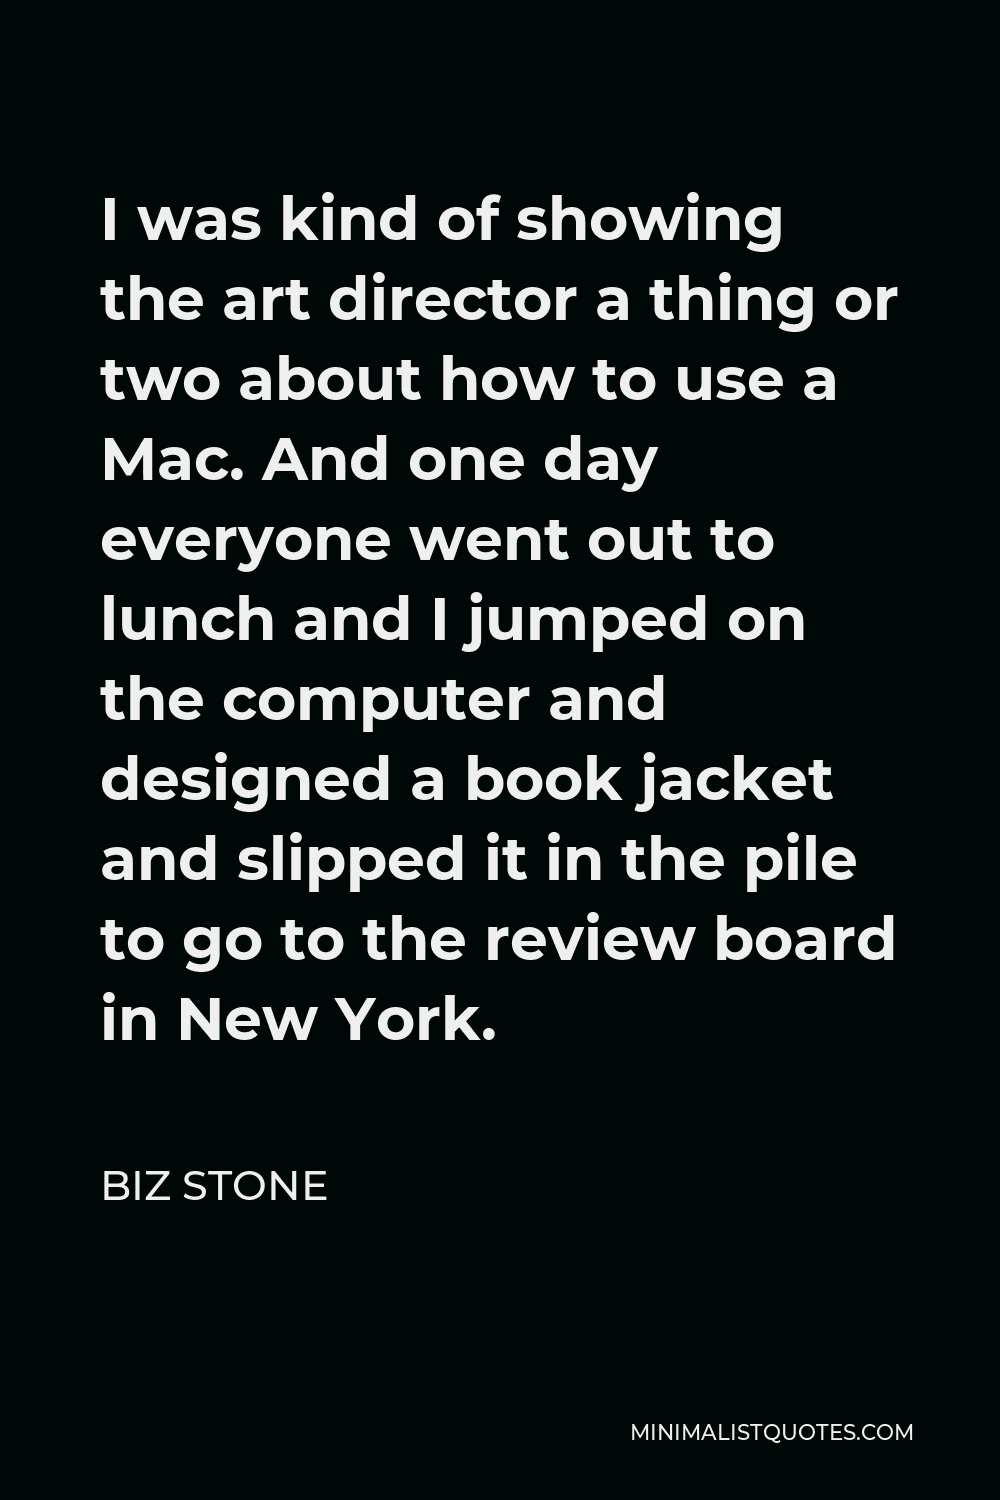 Biz Stone Quote - I was kind of showing the art director a thing or two about how to use a Mac. And one day everyone went out to lunch and I jumped on the computer and designed a book jacket and slipped it in the pile to go to the review board in New York.